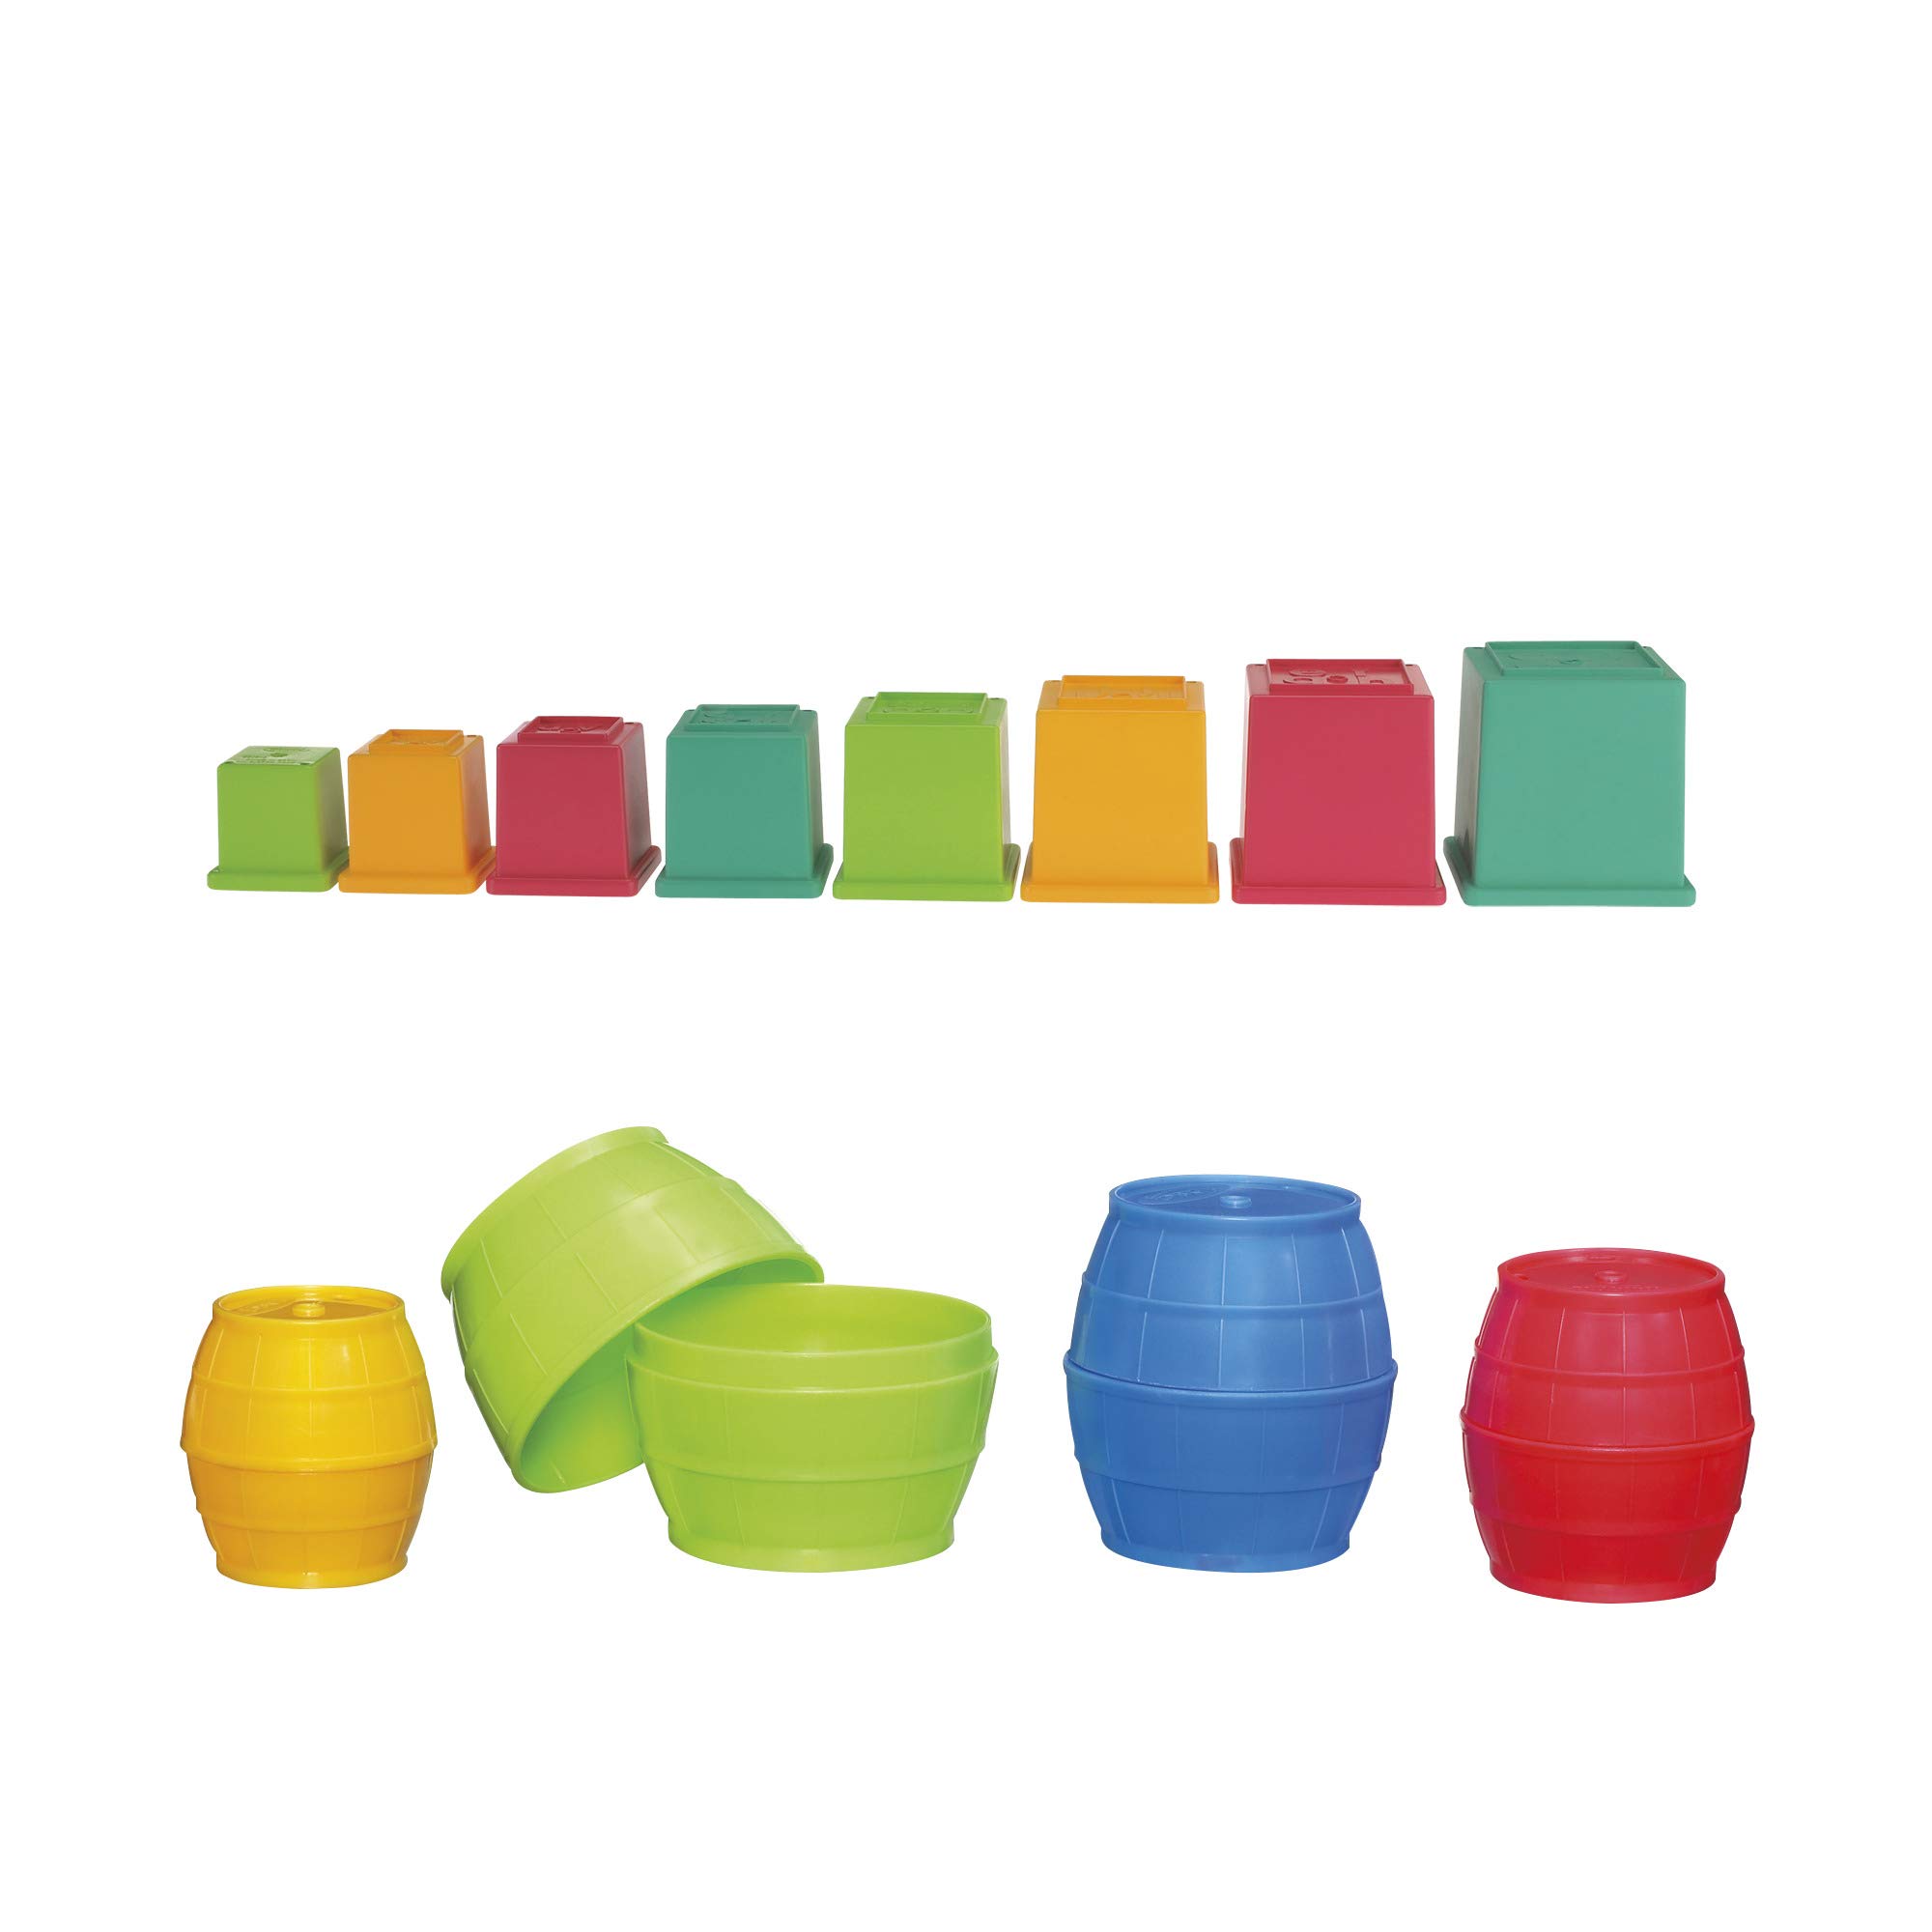 Playskool Stack and Nest Barrels and Blocks Bundle Toy for Babies and Toddlers 1 Year and Up, 16 Piece Set (Amazon Exclusive)